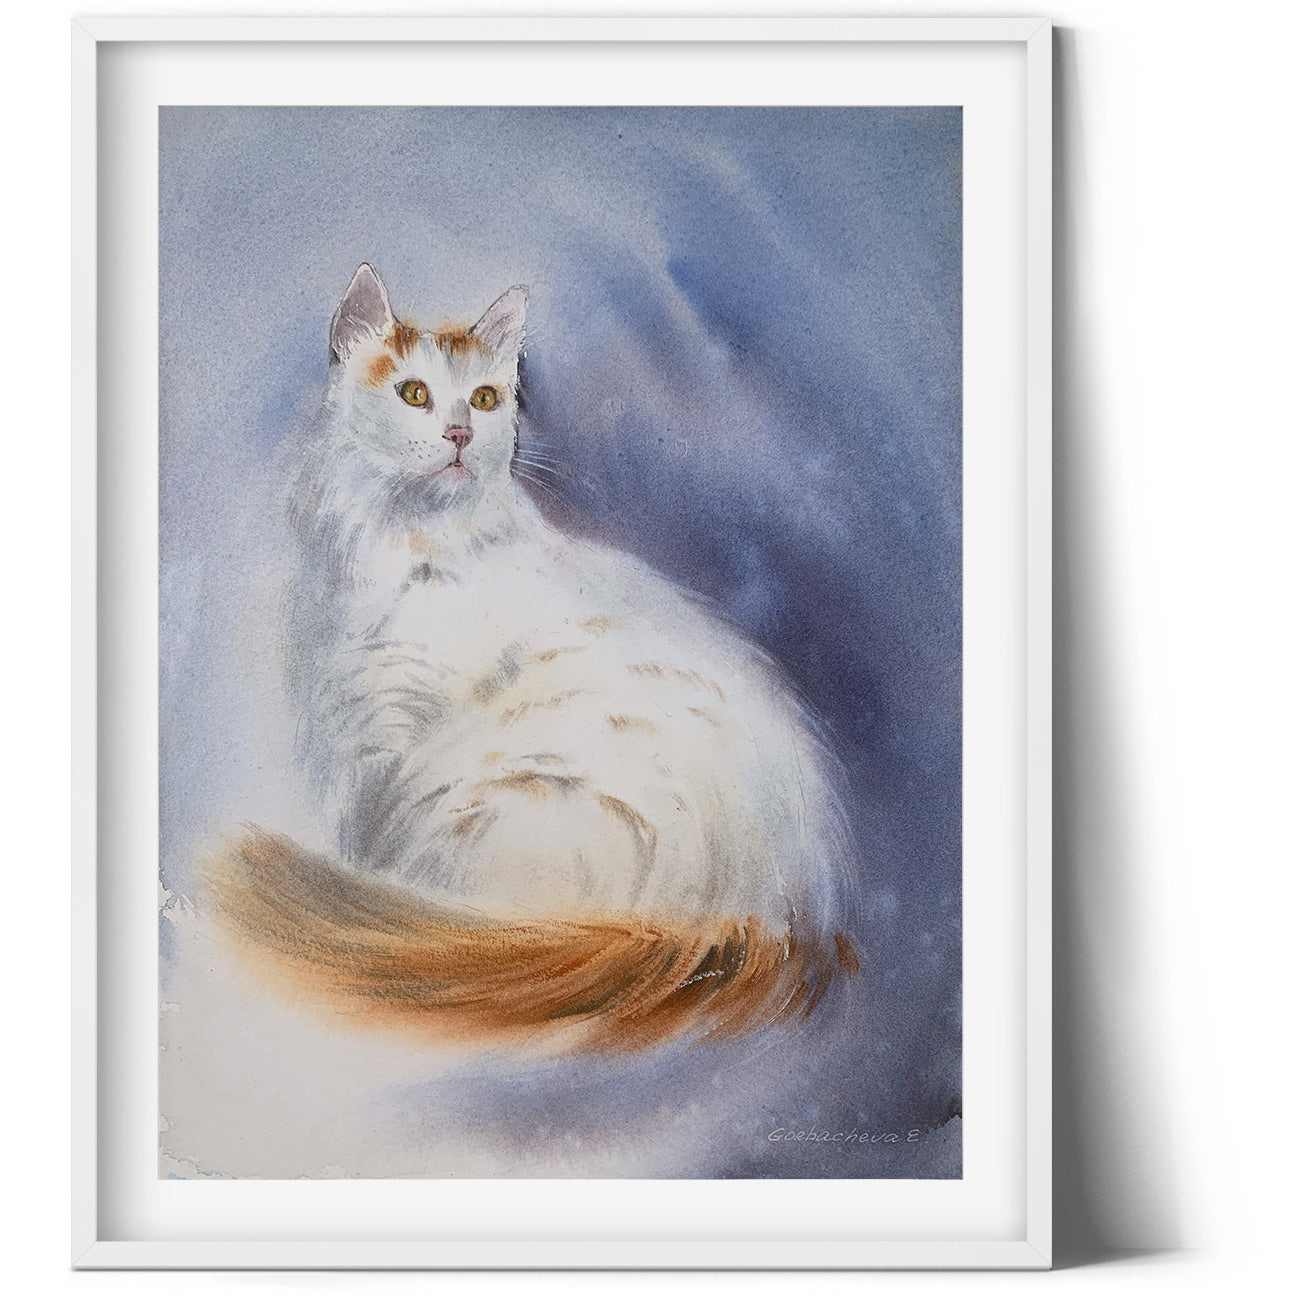 White Cat Painting, Original Watercolor Illustration, Cat Portrait, Animal Wall Art, Cats Lover Gift